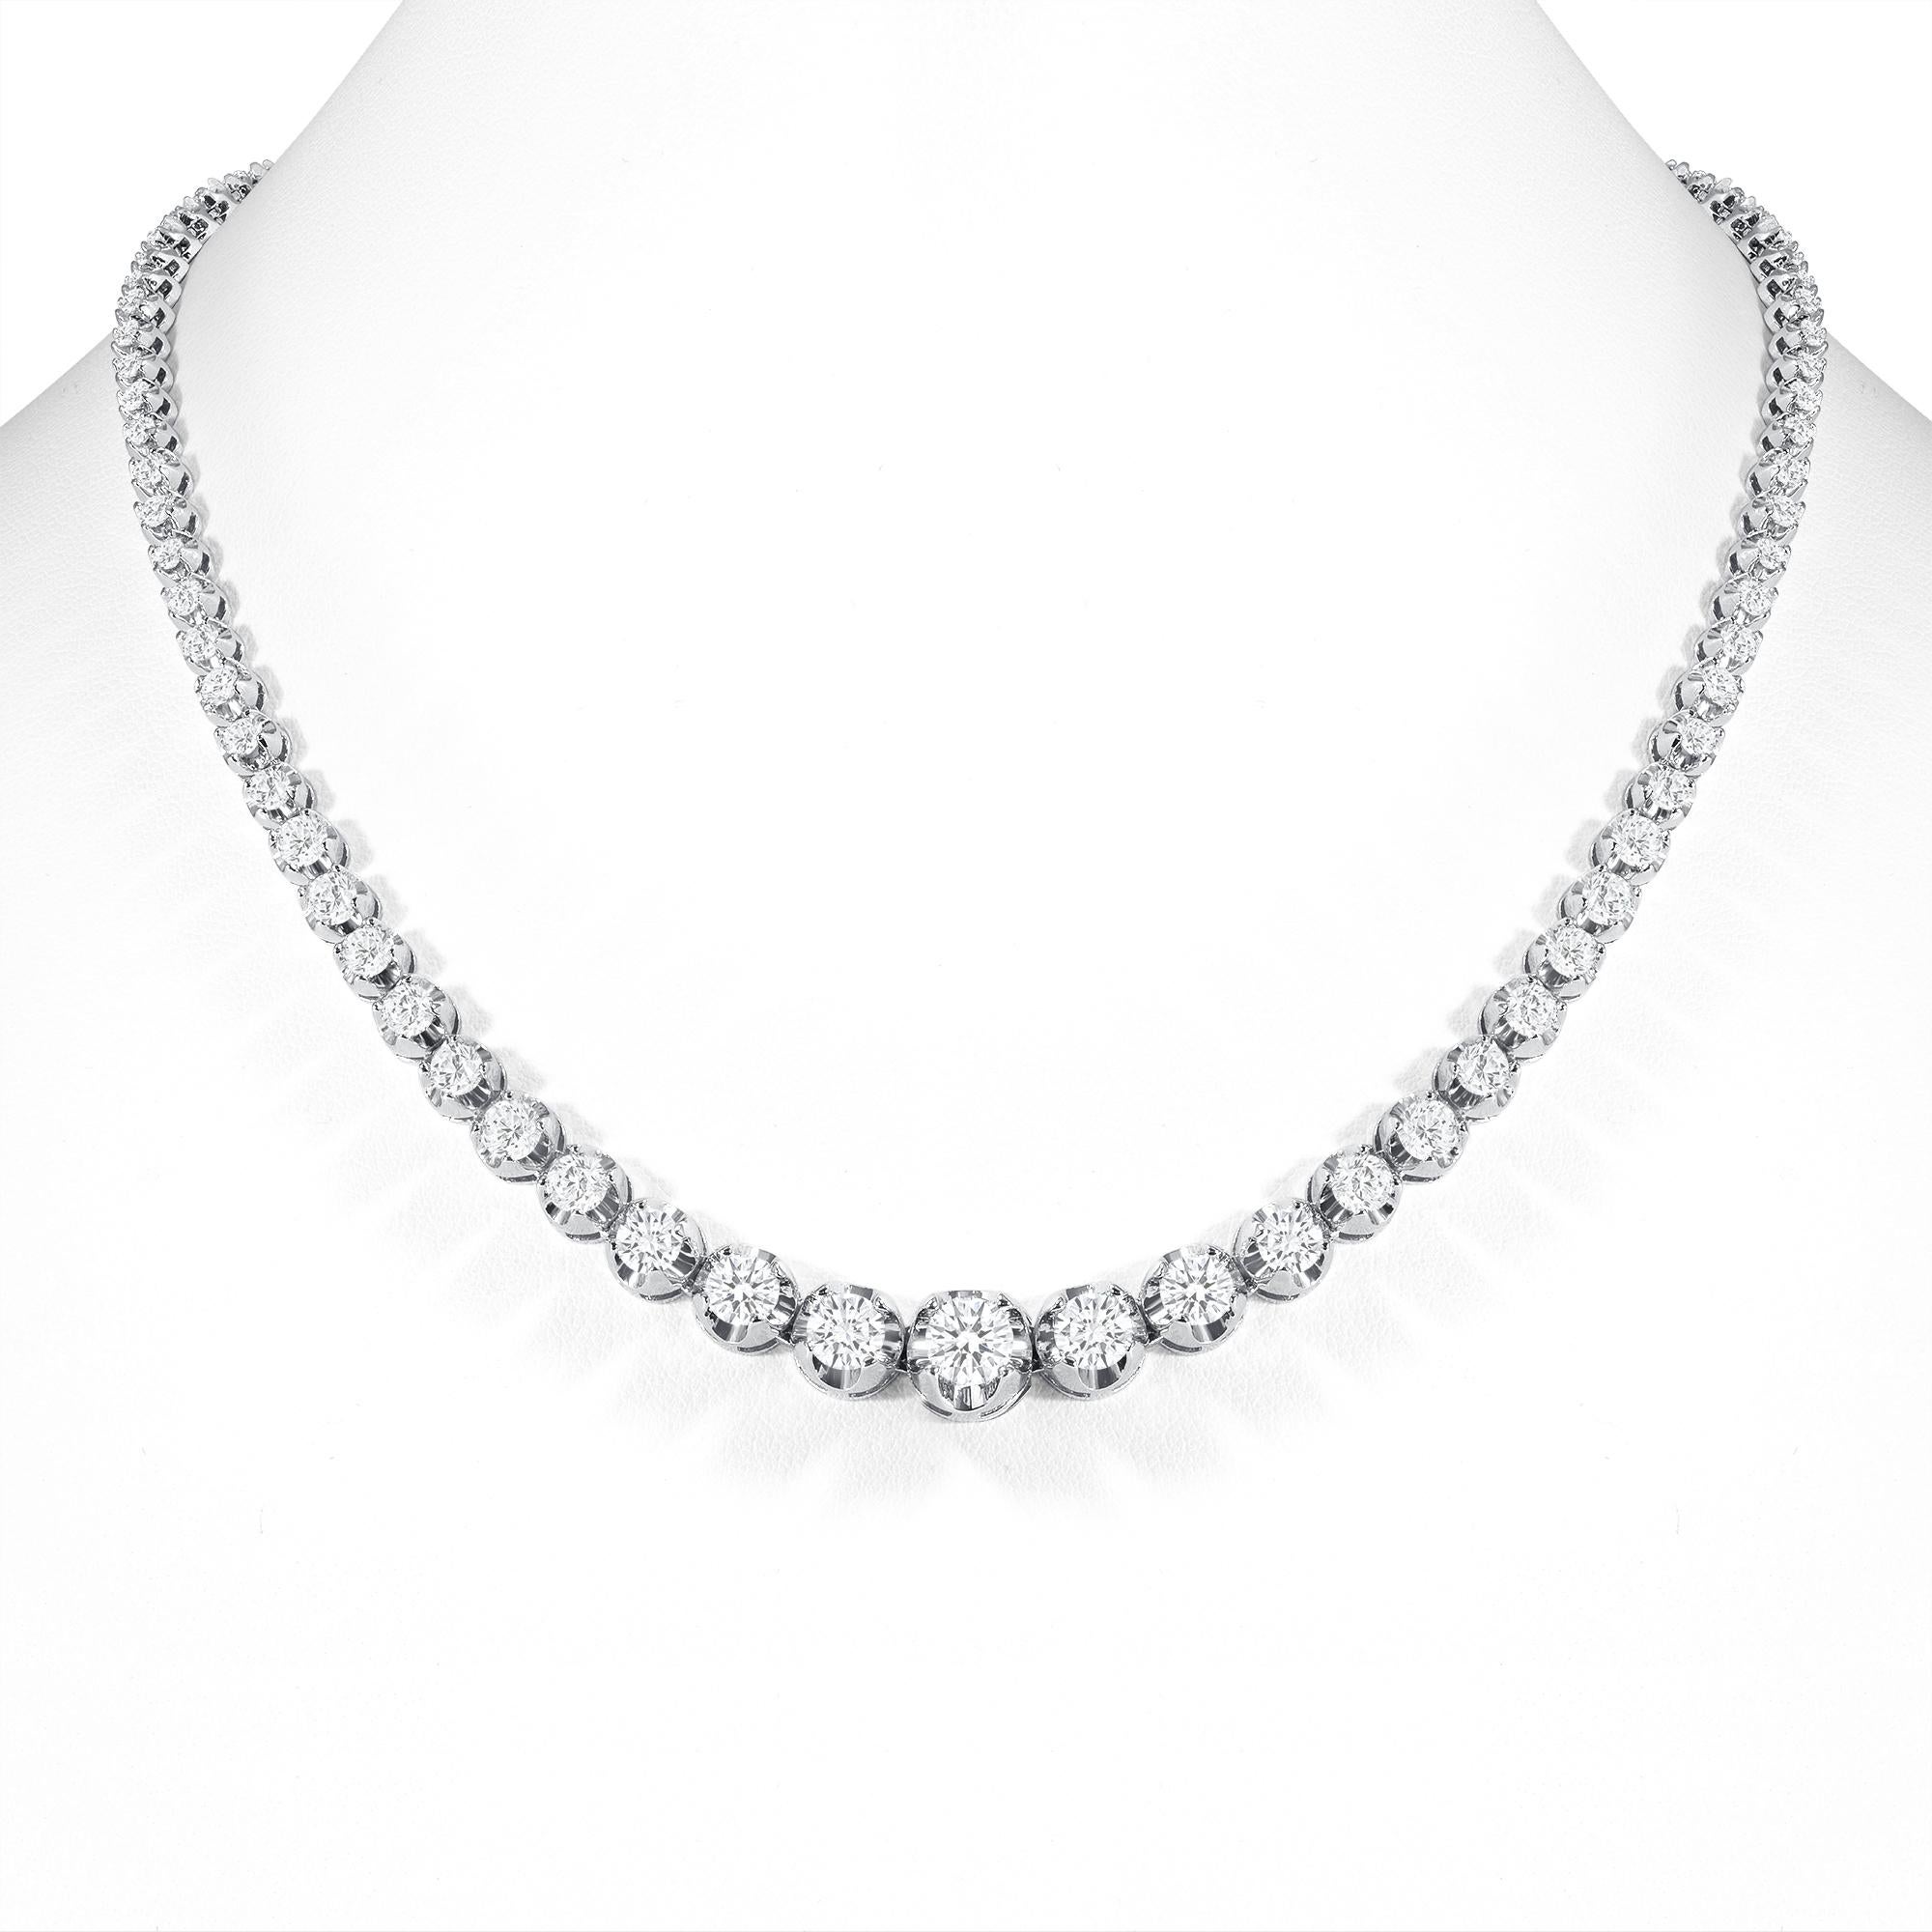 This finely made graduated necklace with beautiful round diamonds sits elegantly on any neck. 

Metal: 14k Gold
Diamond Cut: Round
Total Diamond Approx. Carats:  7ct
Diamond Clarity: VS
Diamond Color: F-G
Size: 20 inches
Color: White Gold
Included